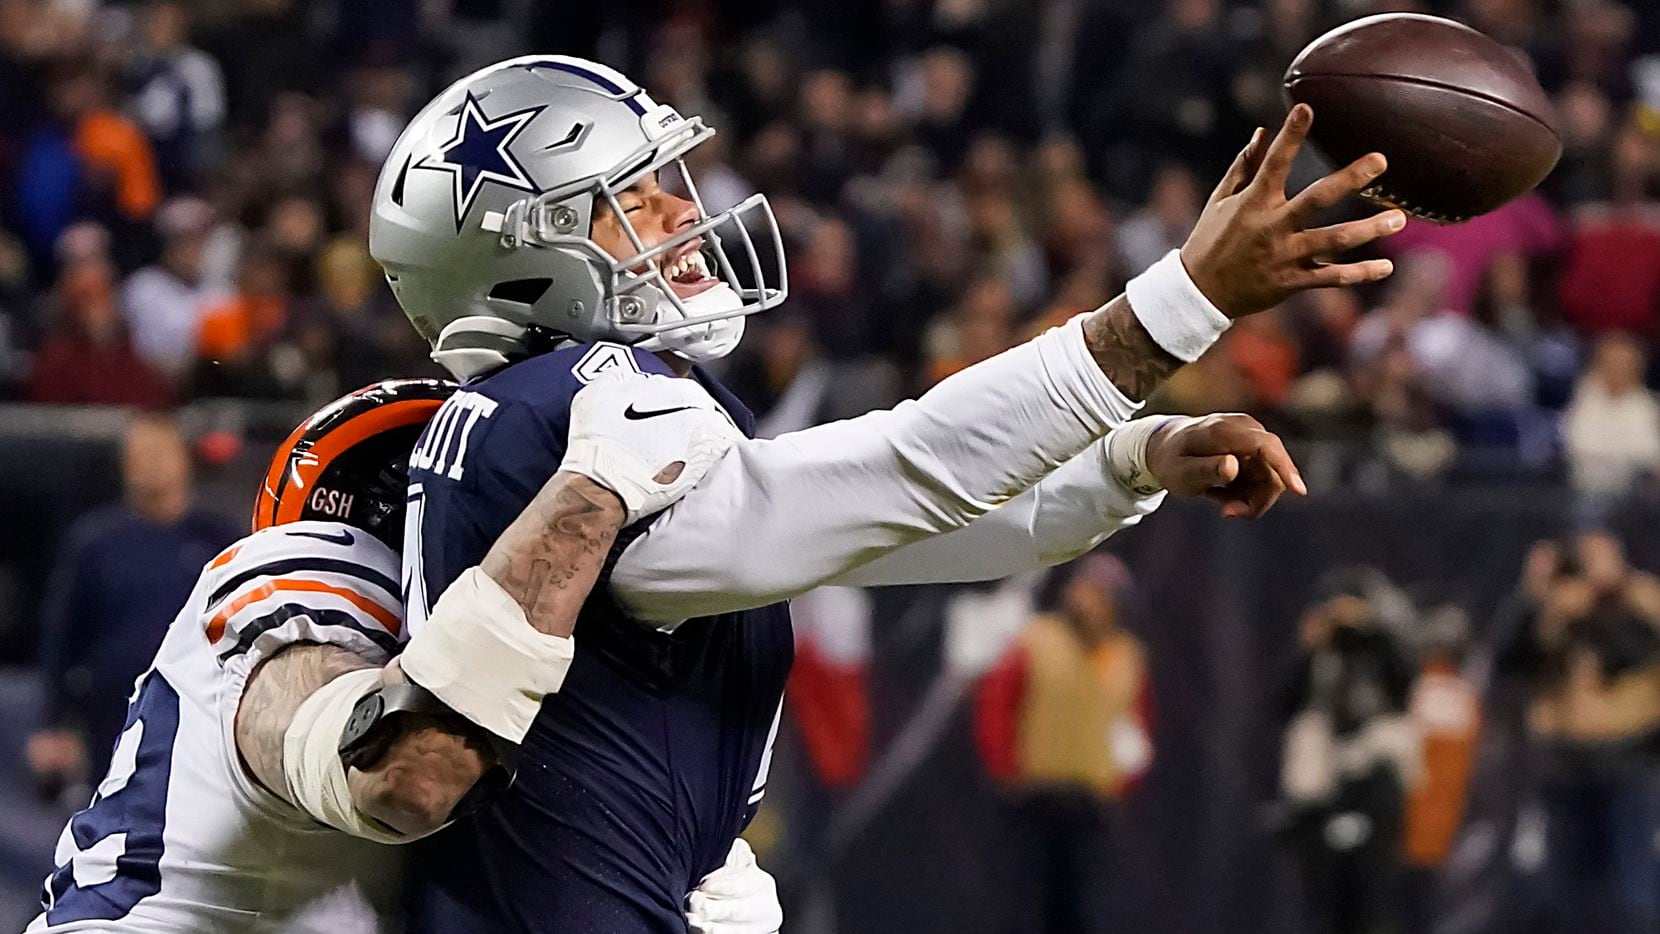 Dallas Cowboys quarterback Dak Prescott (4) tries to get off a pass as he is hit by Chicago Bears outside linebacker Aaron Lynch (99), resulting in a ruling of intentional grounding, during the second half of an NFL football game at Soldier Field on Thursday, Dec. 5, 2019, in Chicago. (Smiley N. Pool/The Dallas Morning News)